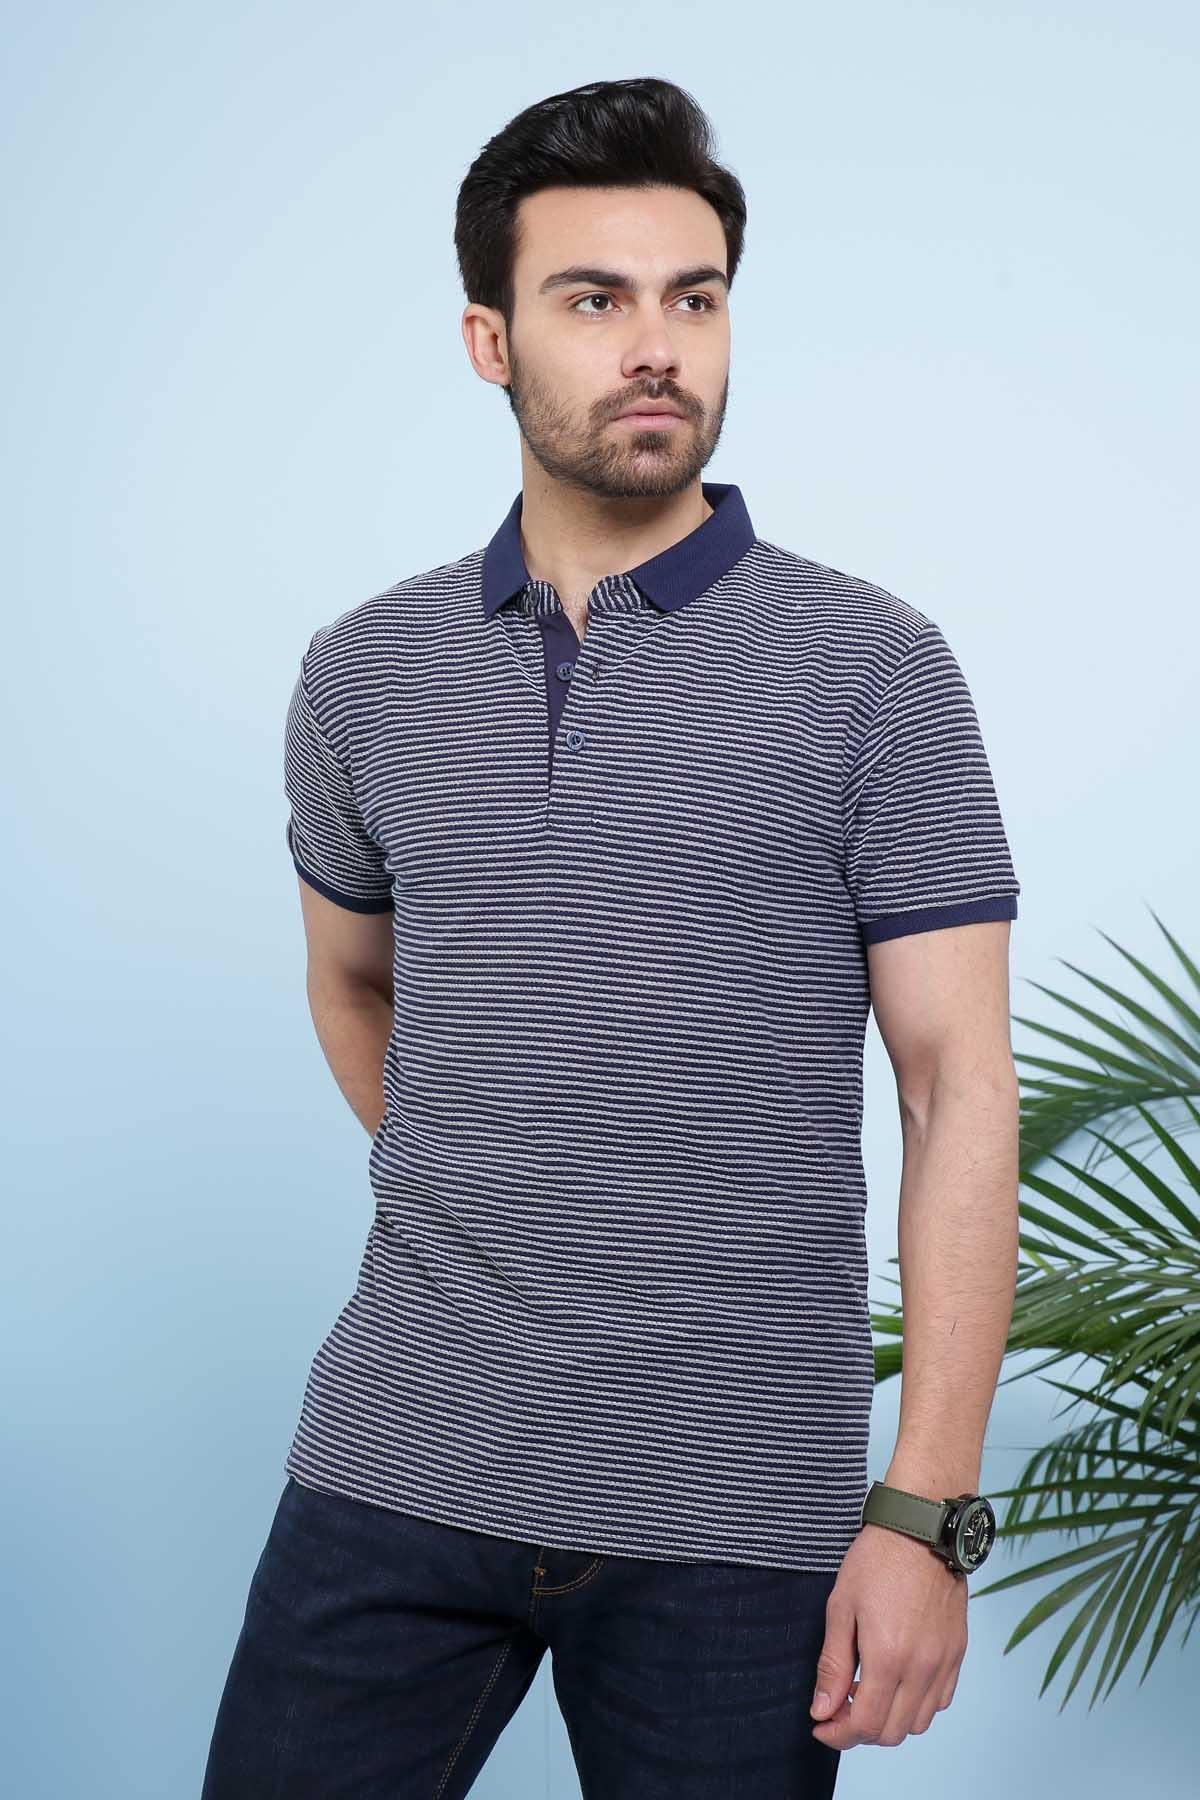 T SHIRT POLO NAVY WHITE at Charcoal Clothing